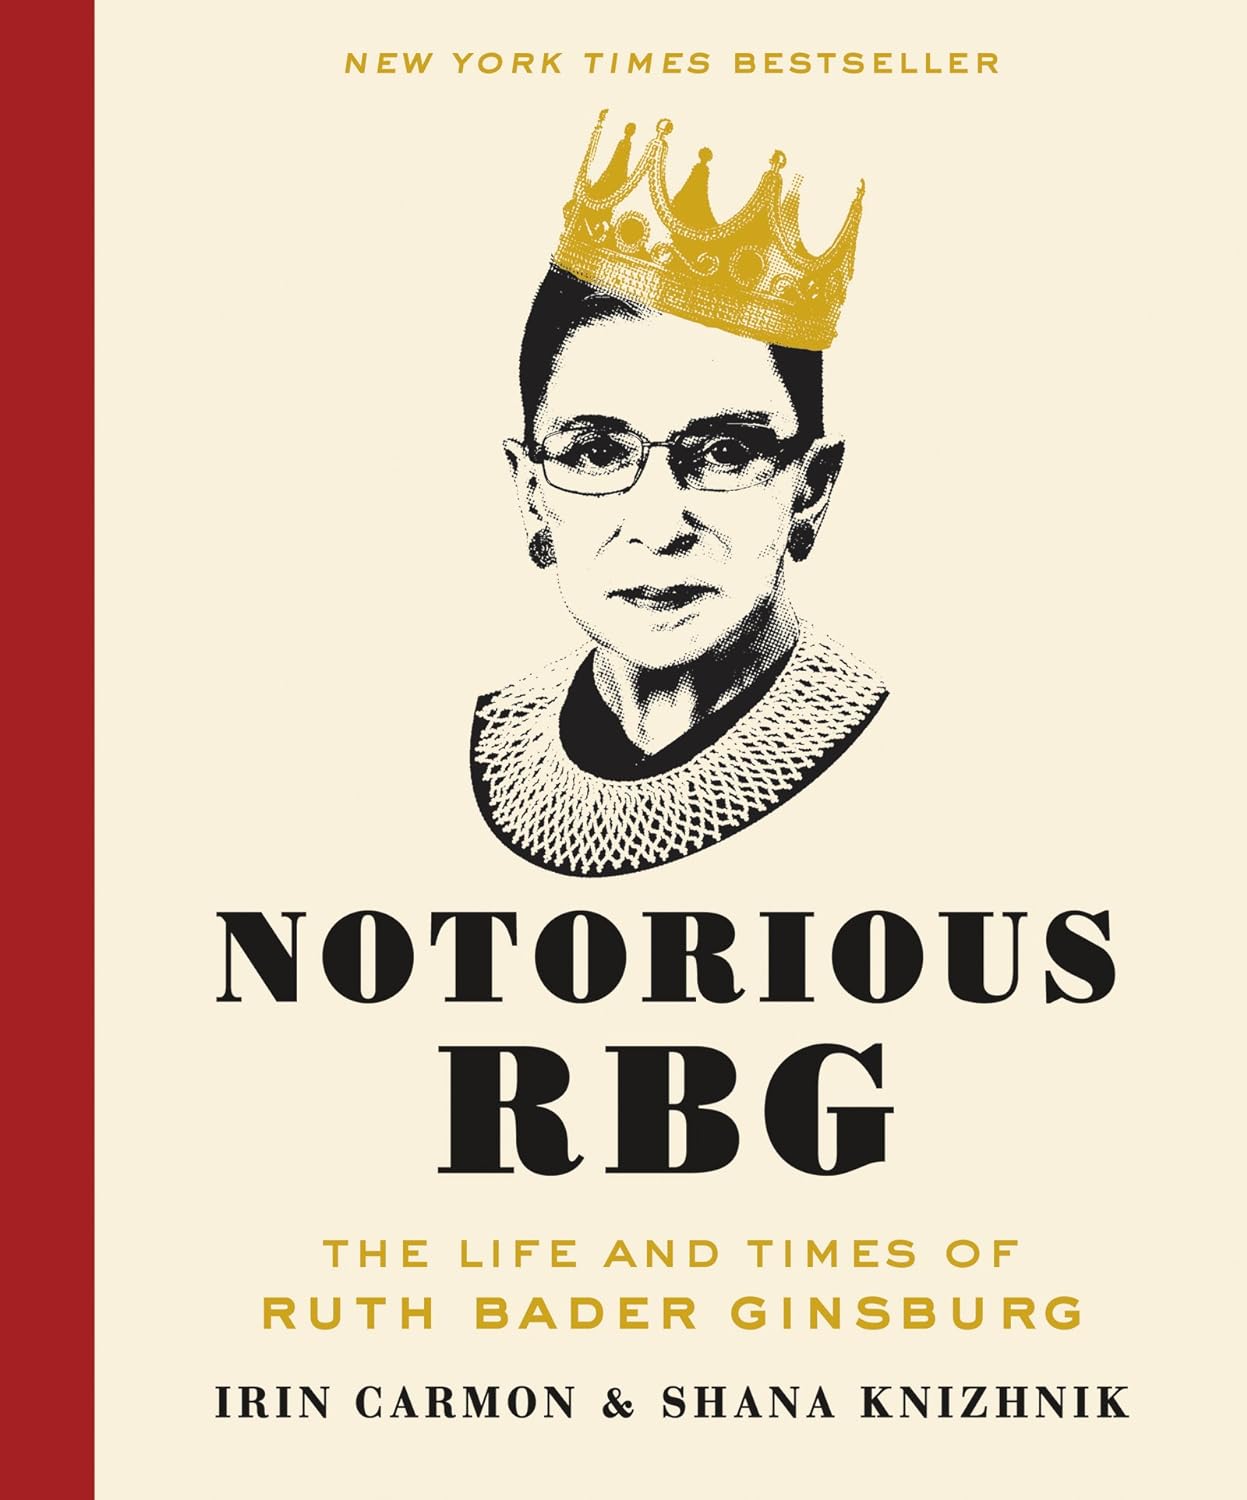 Notorious RBG - The Life and Times of Ruth Bader Ginsburg - Irin Carmon